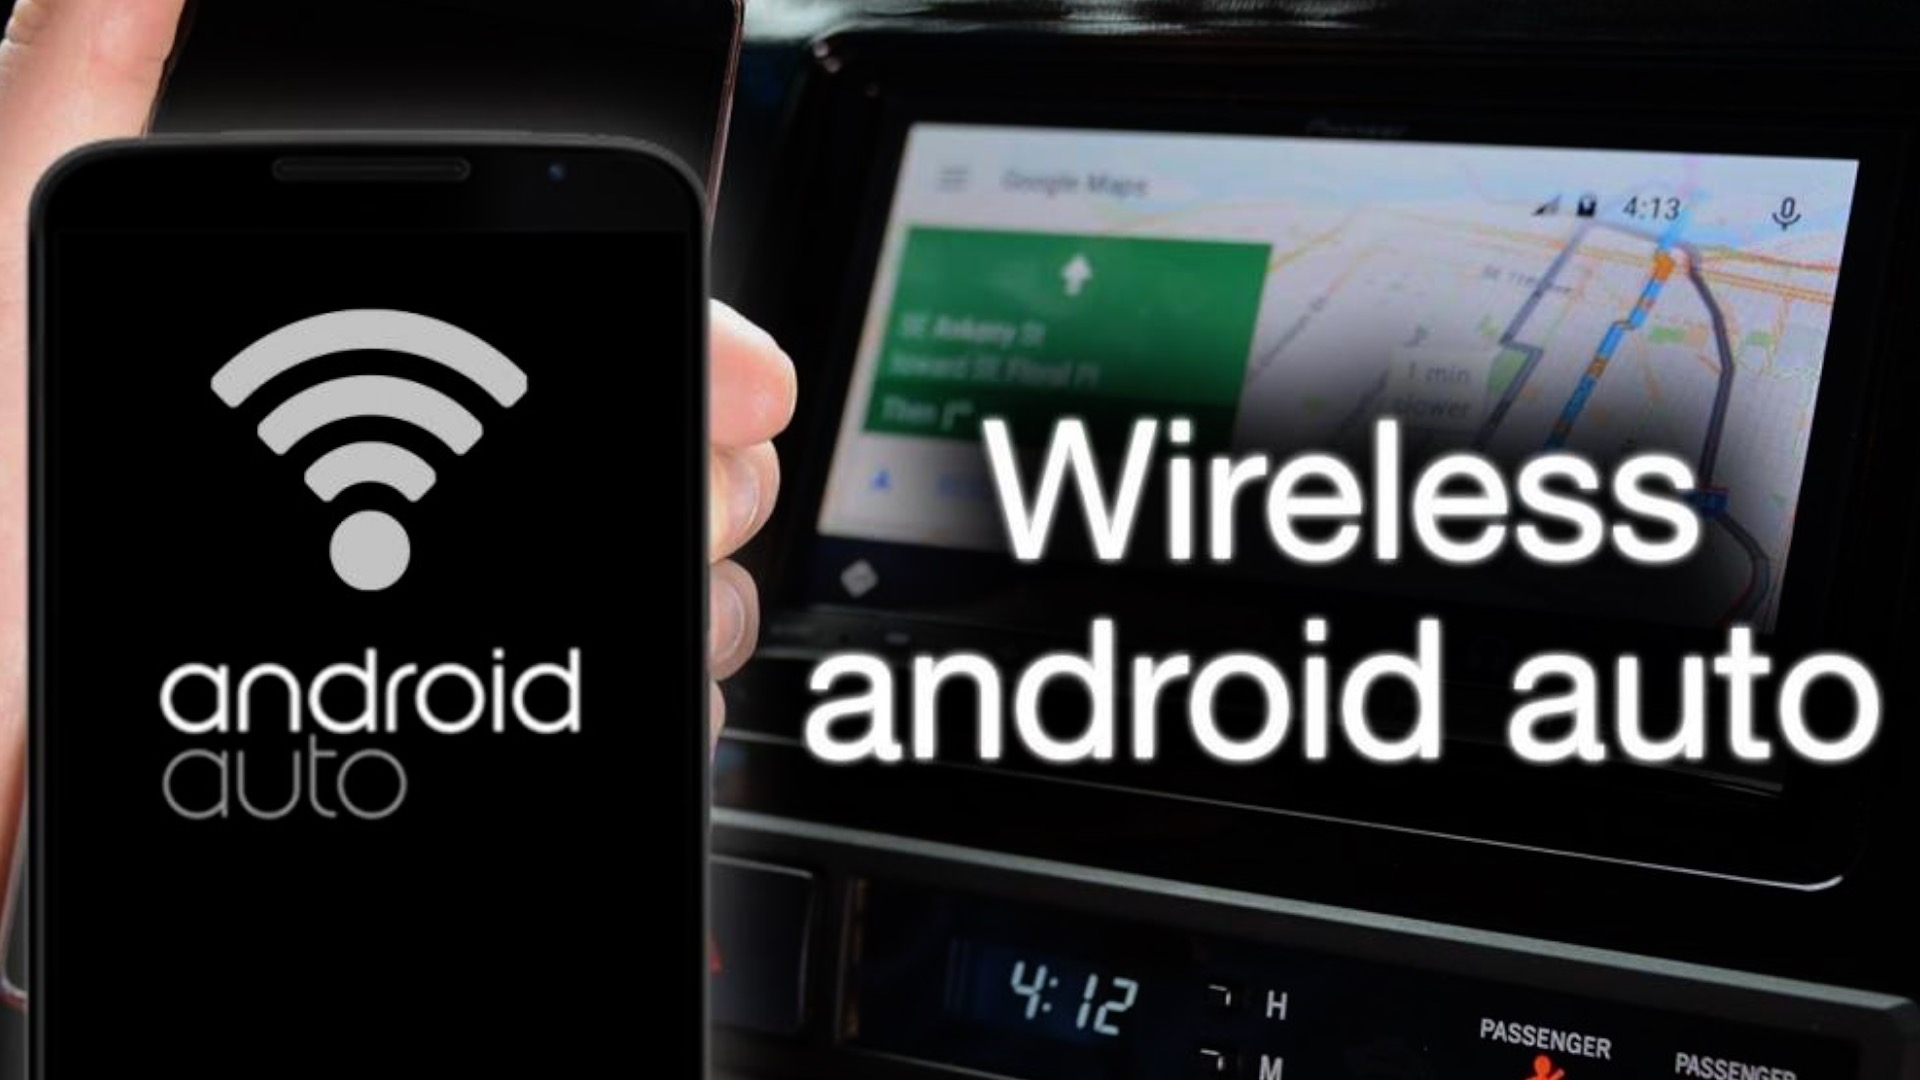 Android Auto wireless